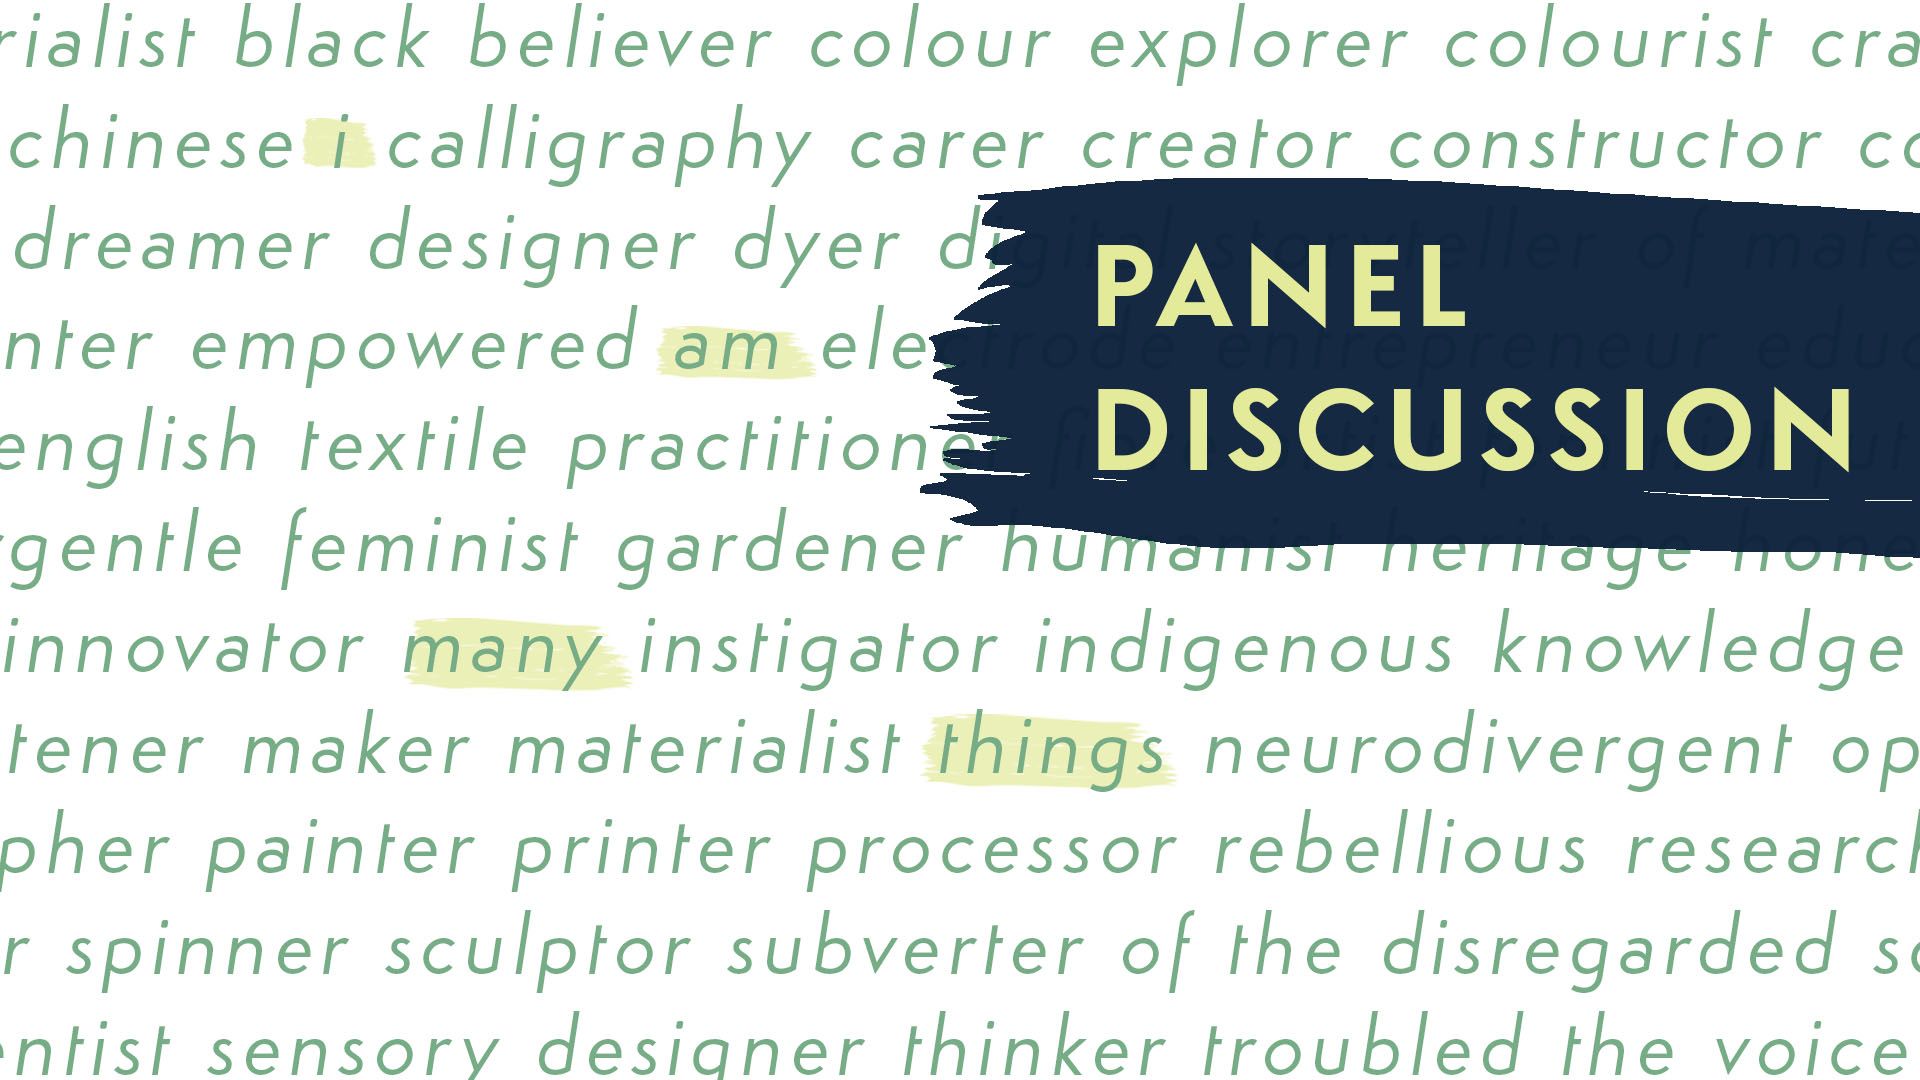 I AM MANY THINGS: A panel discussion